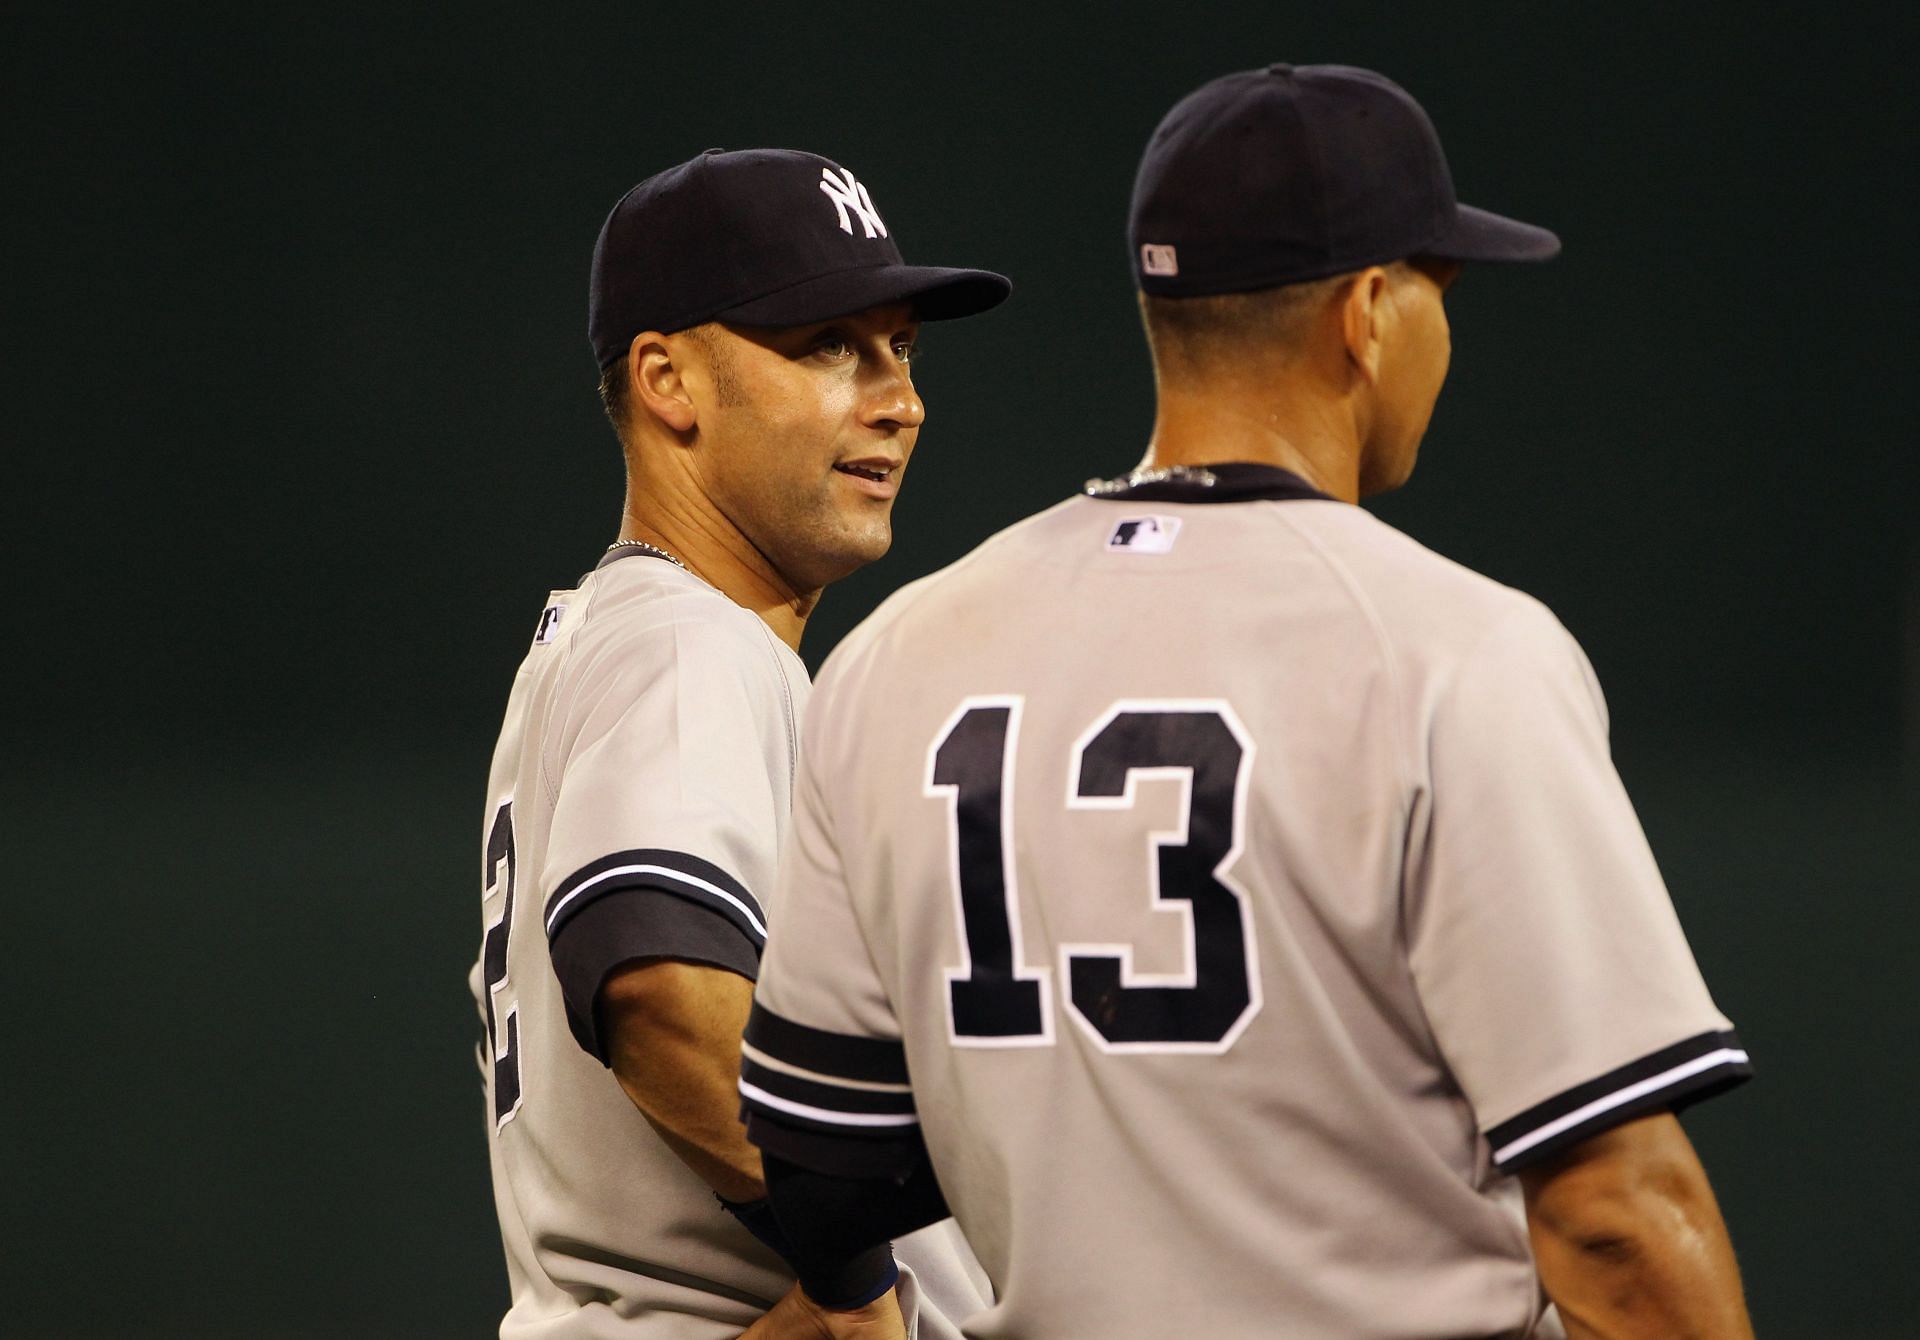 Alex Rodriguez and Derek Jeter were the two leading stars for New York Yankees